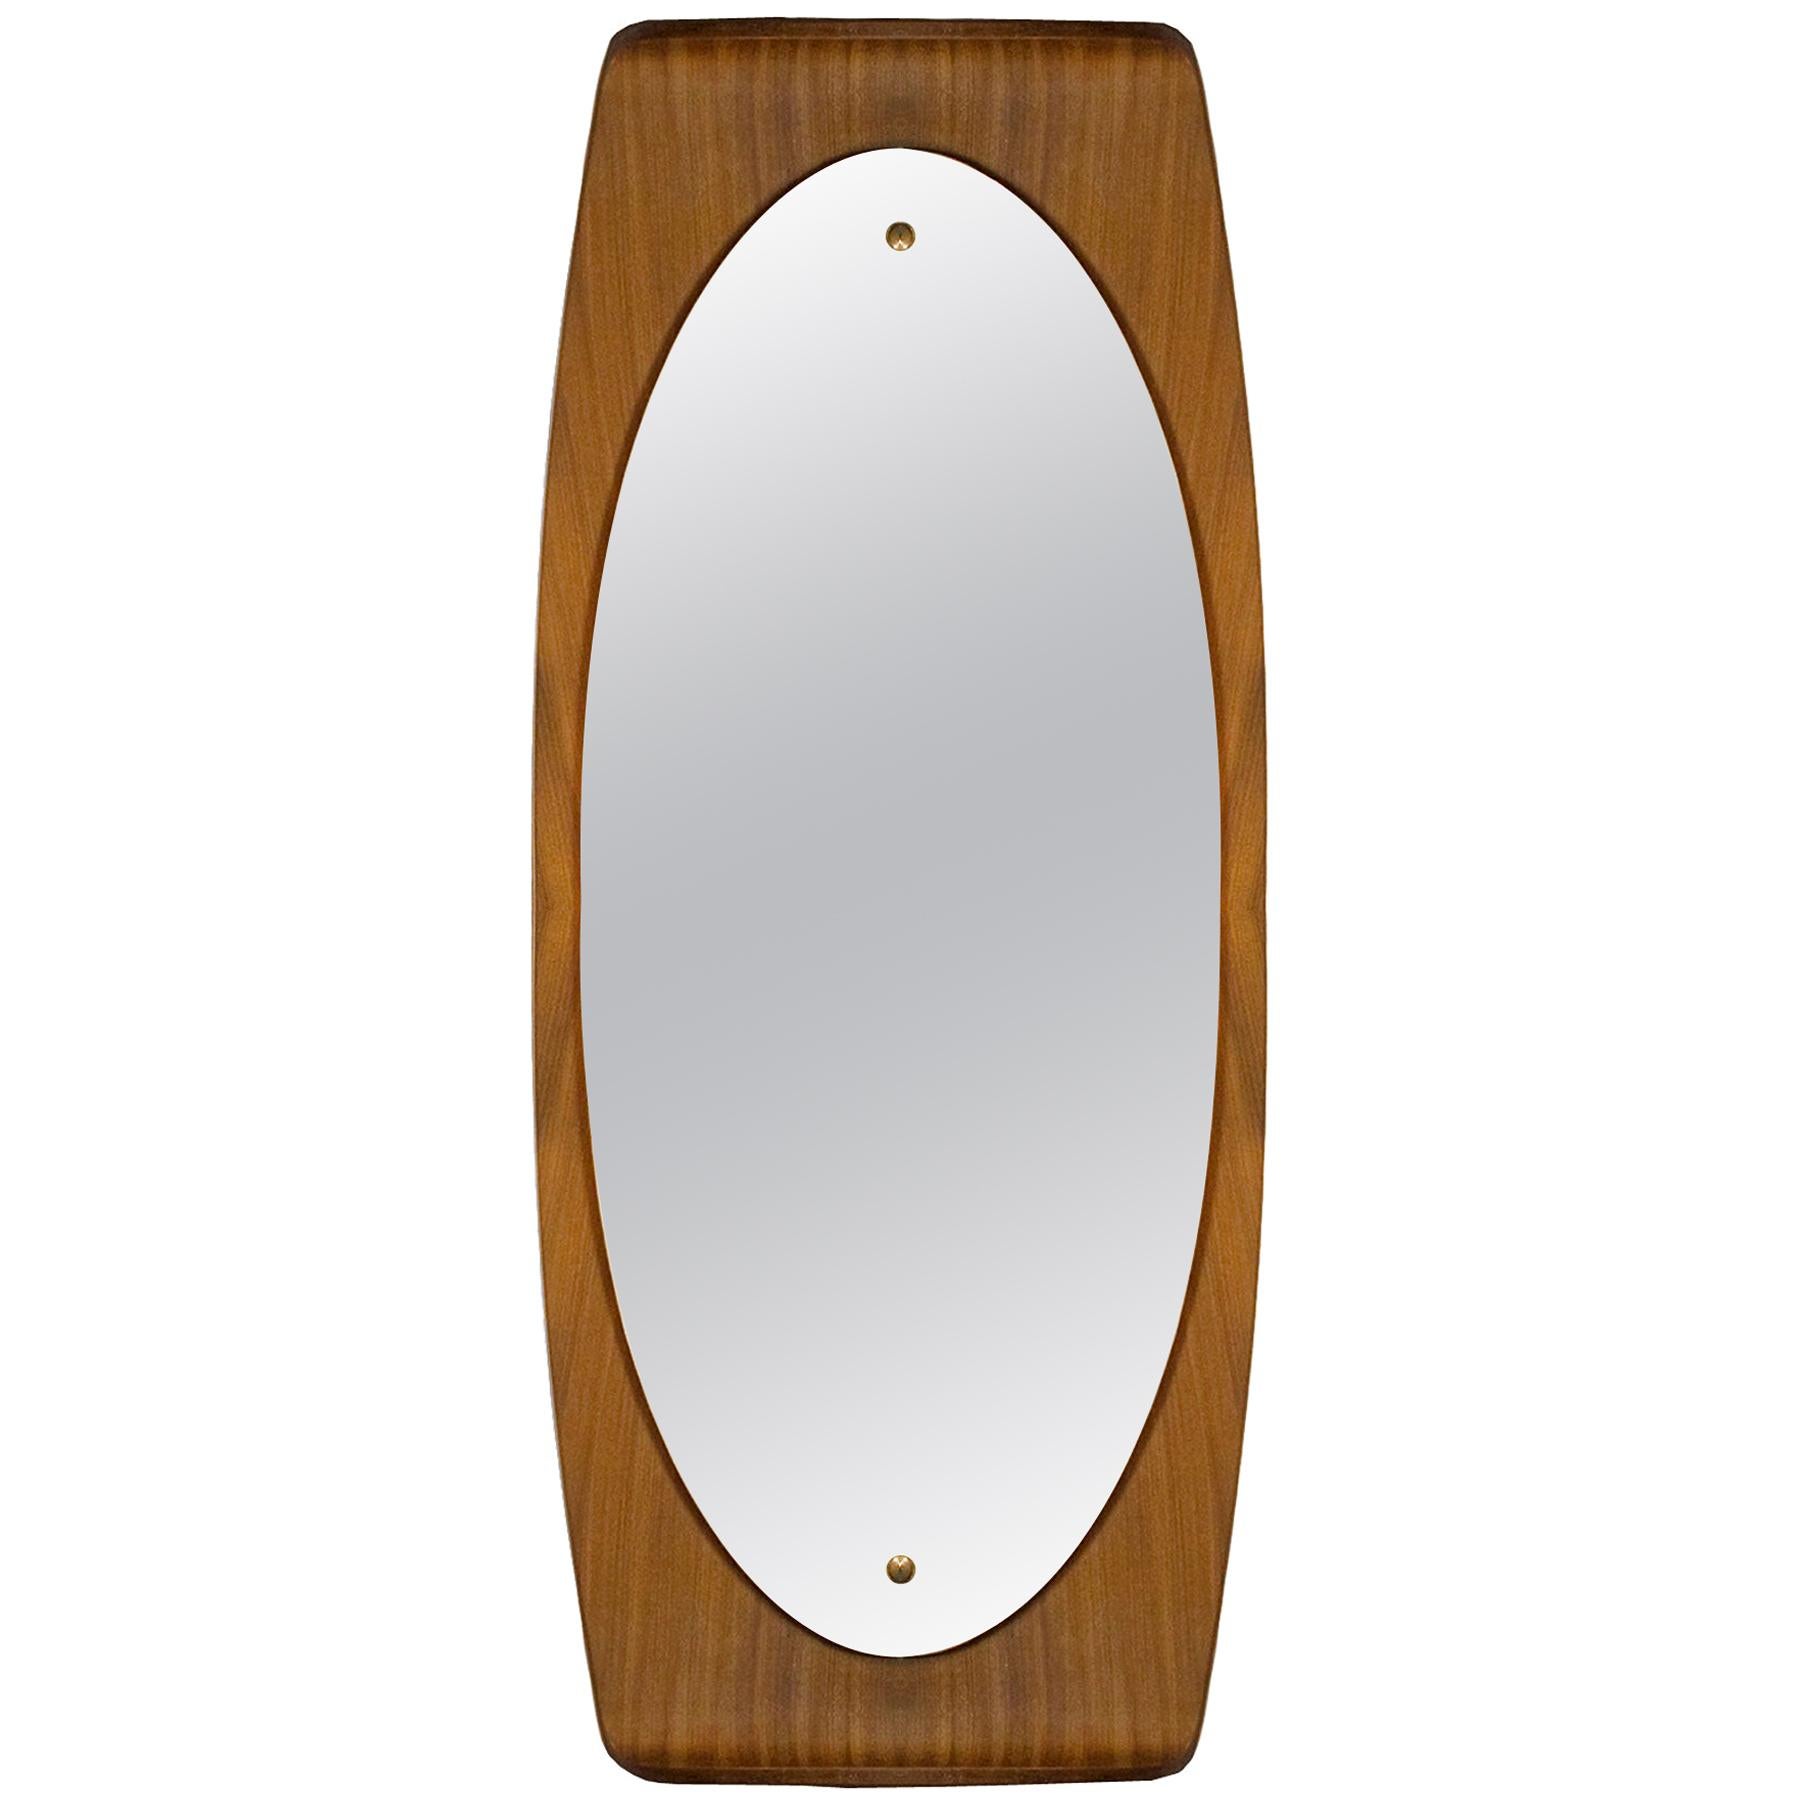 Large Mid-Century Modern Curved Mirror by Campo & Graffi, Teak, Brass - Italy